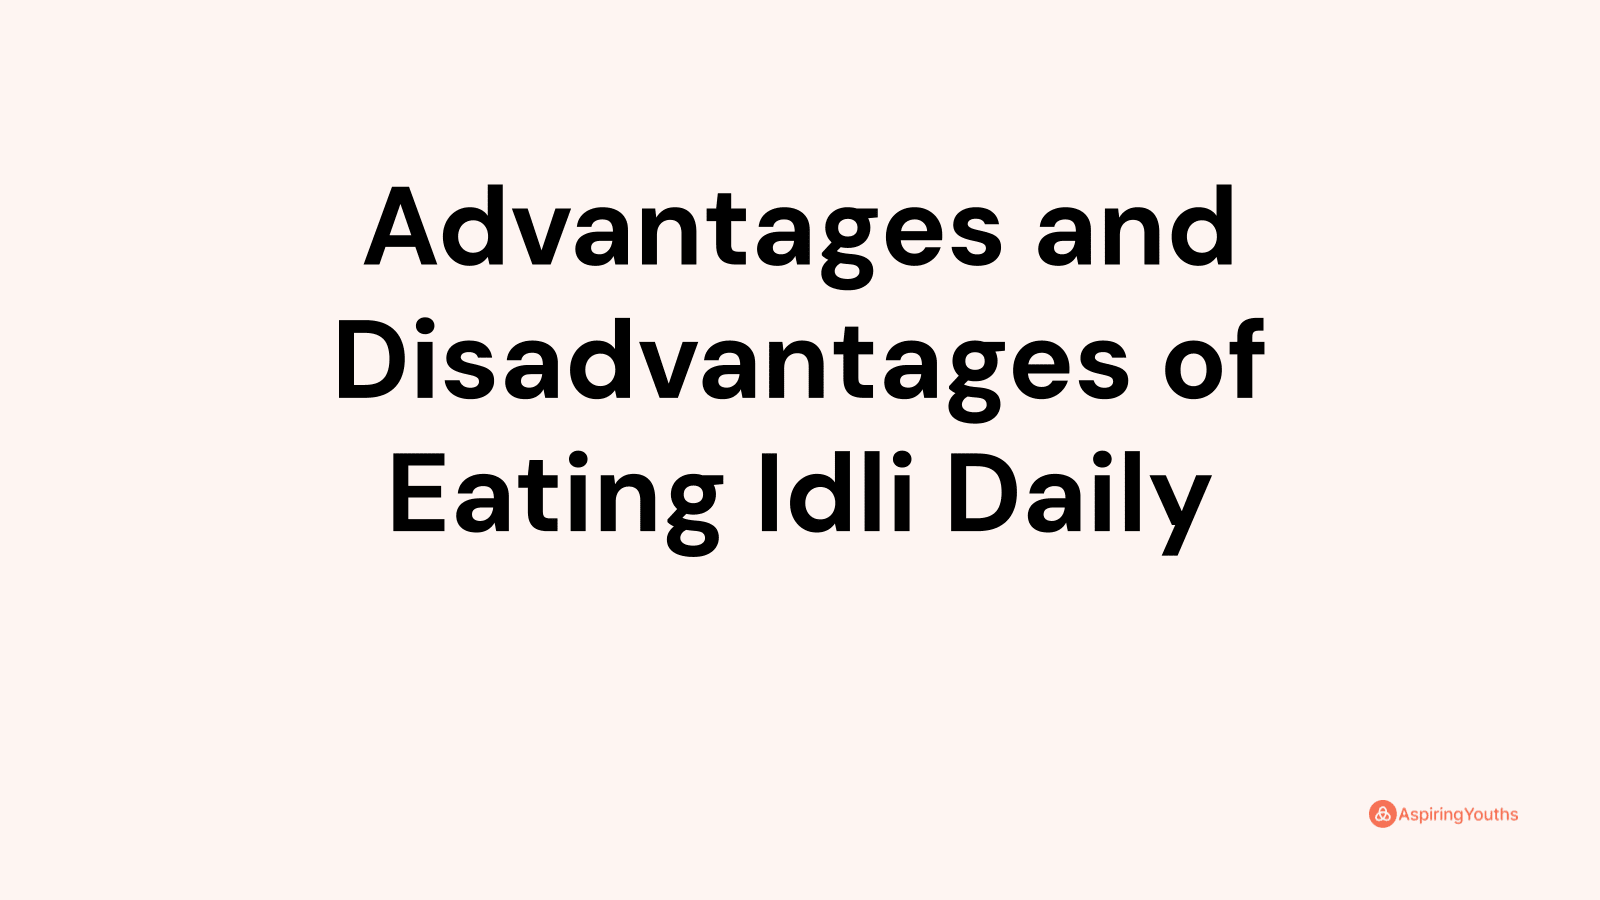 Advantages and disadvantages of Eating Idli Daily